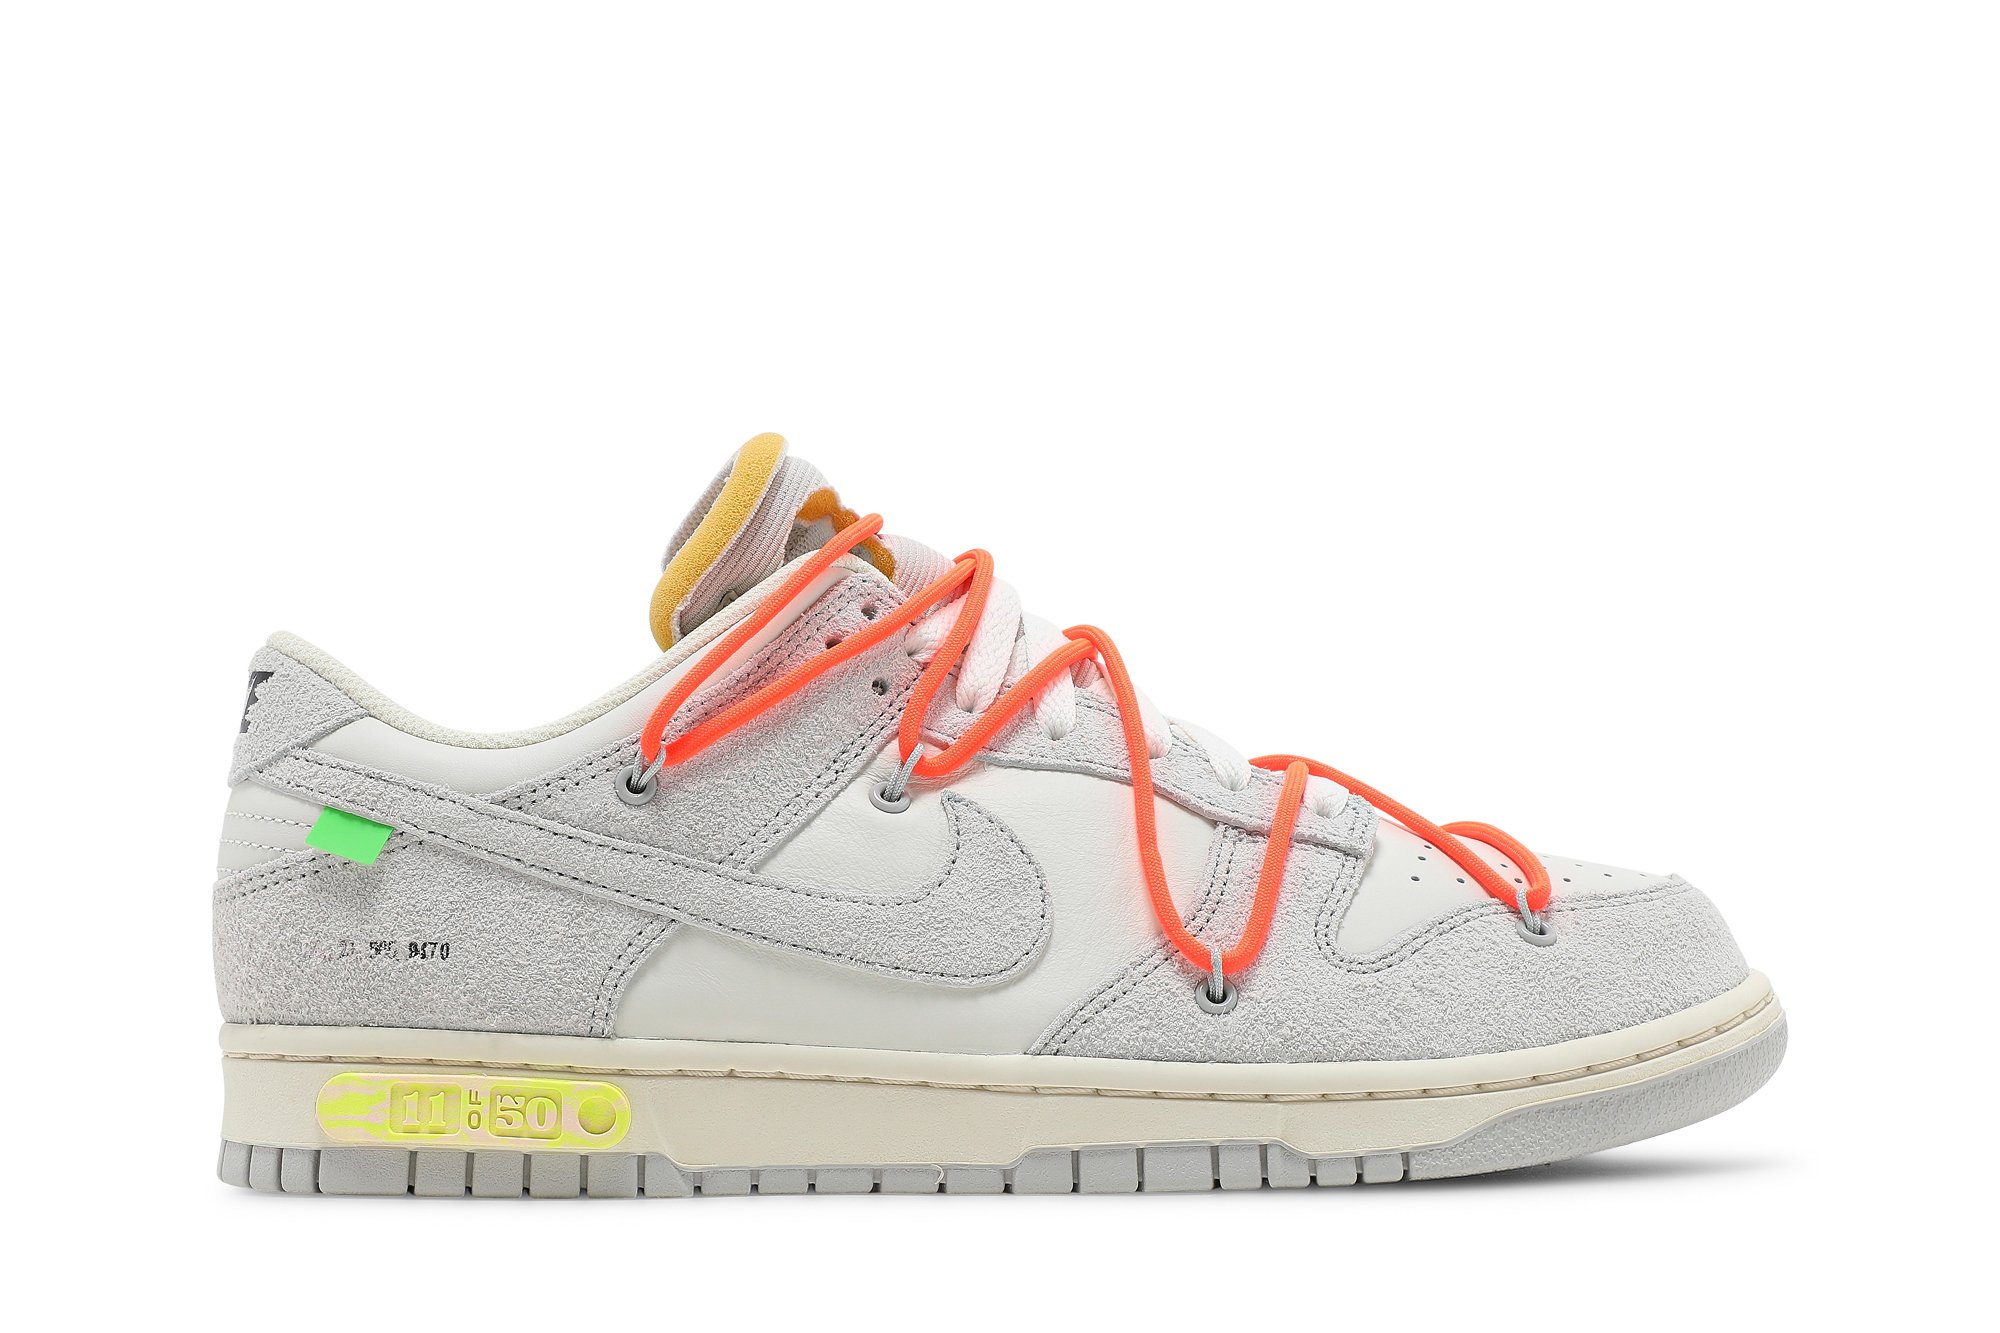 Buy Off-White x Dunk Low 'Lot 11 of 50' - DJ0950 108 - White | GOAT